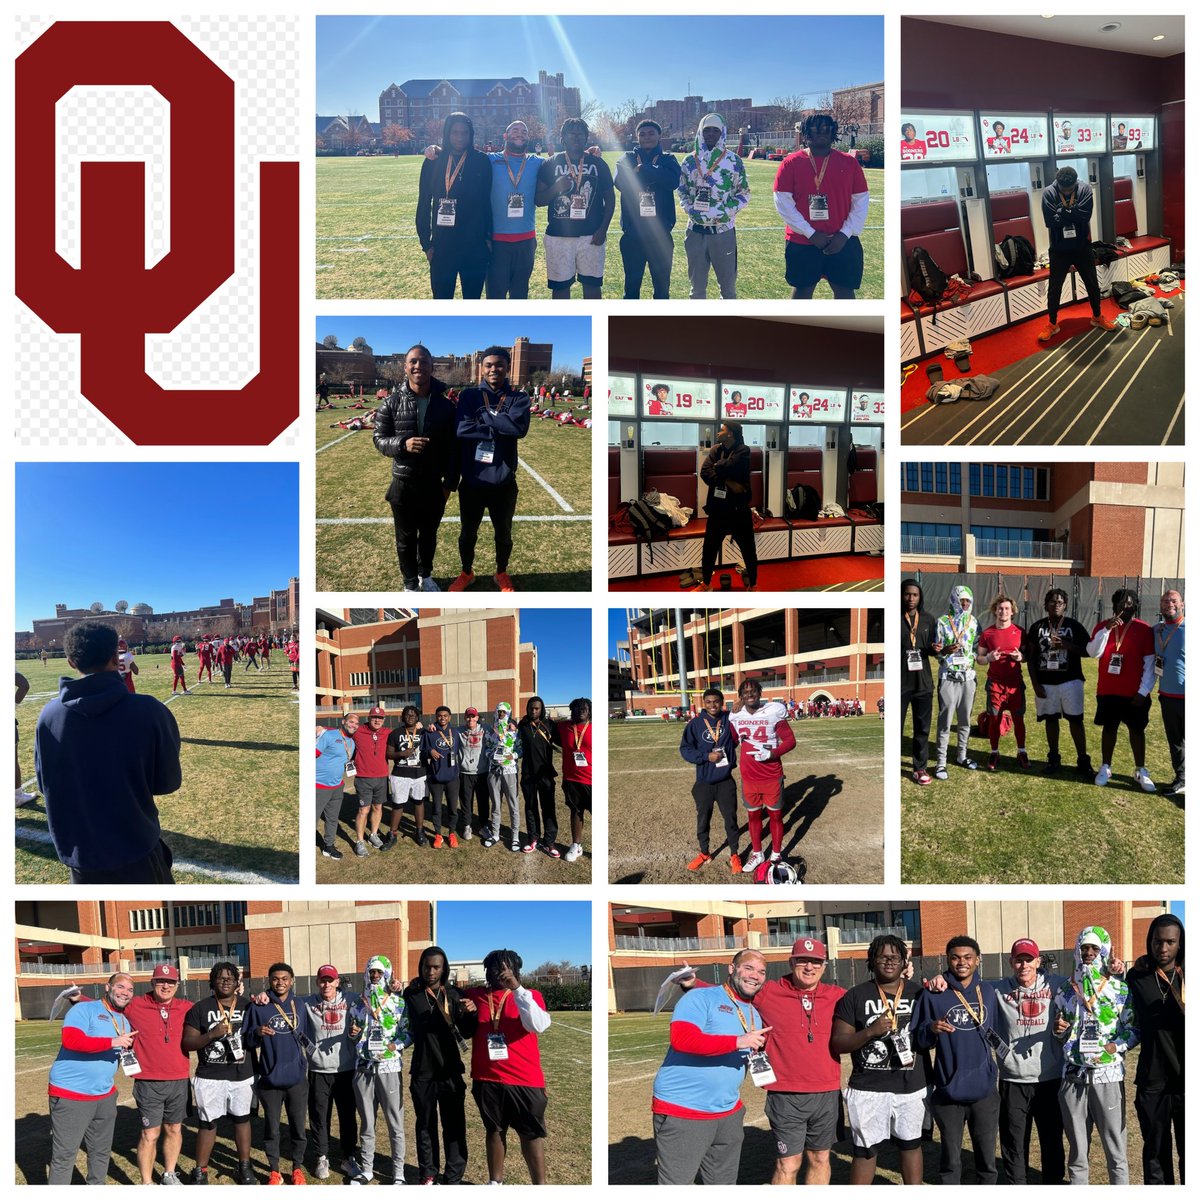 'Thank you Coach Roof and Coach Venables for the invite to OU's practice. Had a great time catching up with old teammates and bonding with new ones. Shoutout to Coach Runnels for bringing us together and sharing some amazing memories. 🏈 #BoomerSooner #FootballFamily'